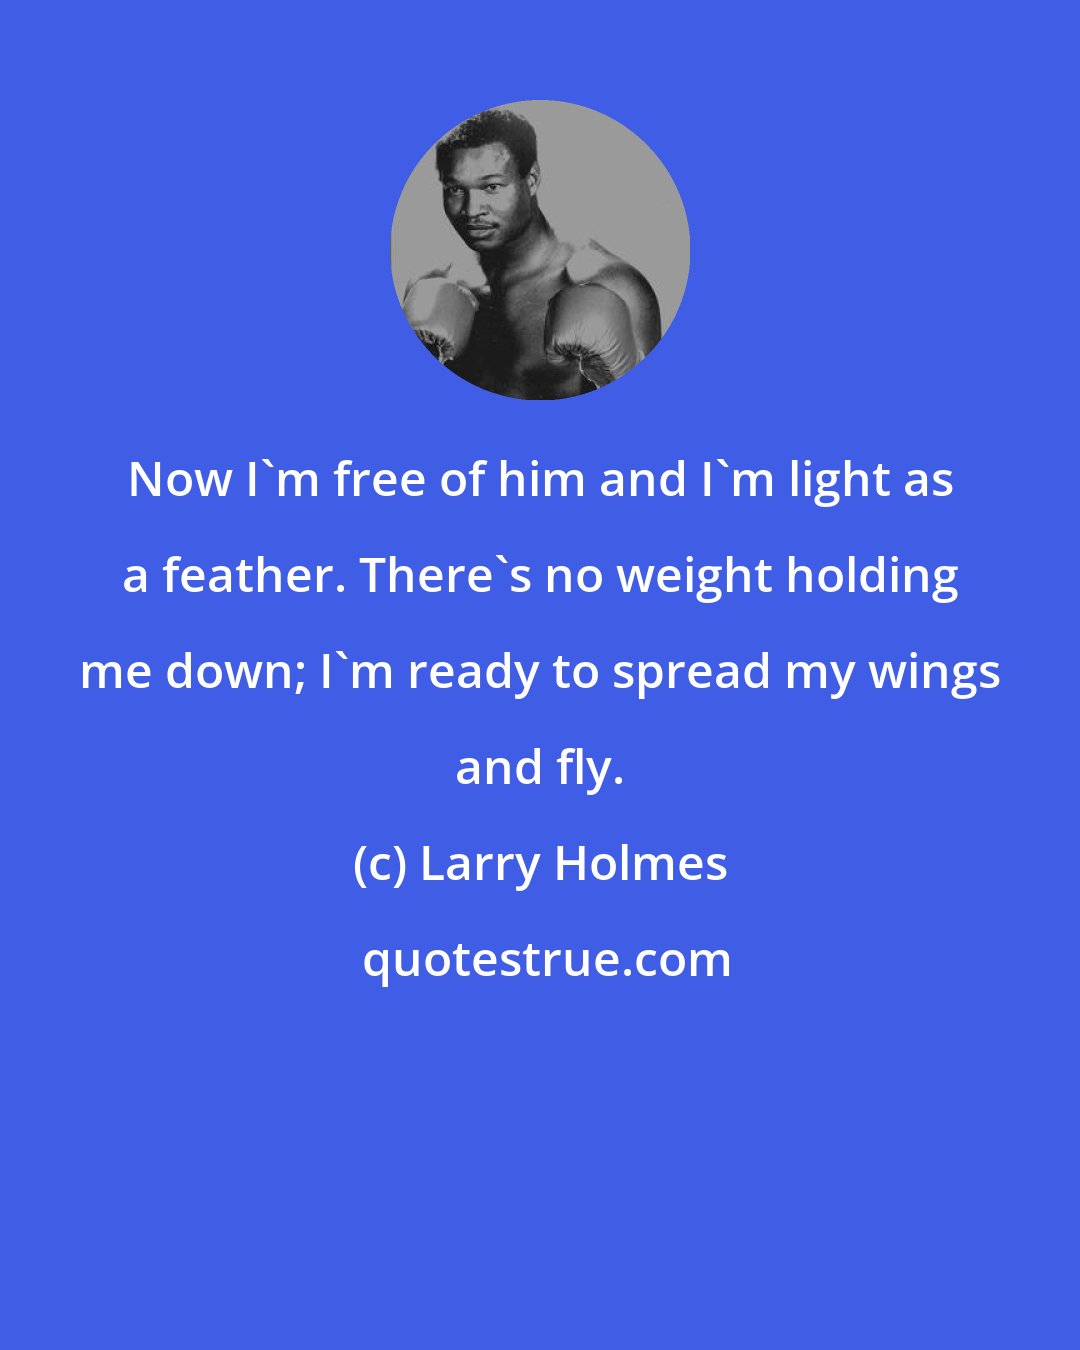 Larry Holmes: Now I'm free of him and I'm light as a feather. There's no weight holding me down; I'm ready to spread my wings and fly.